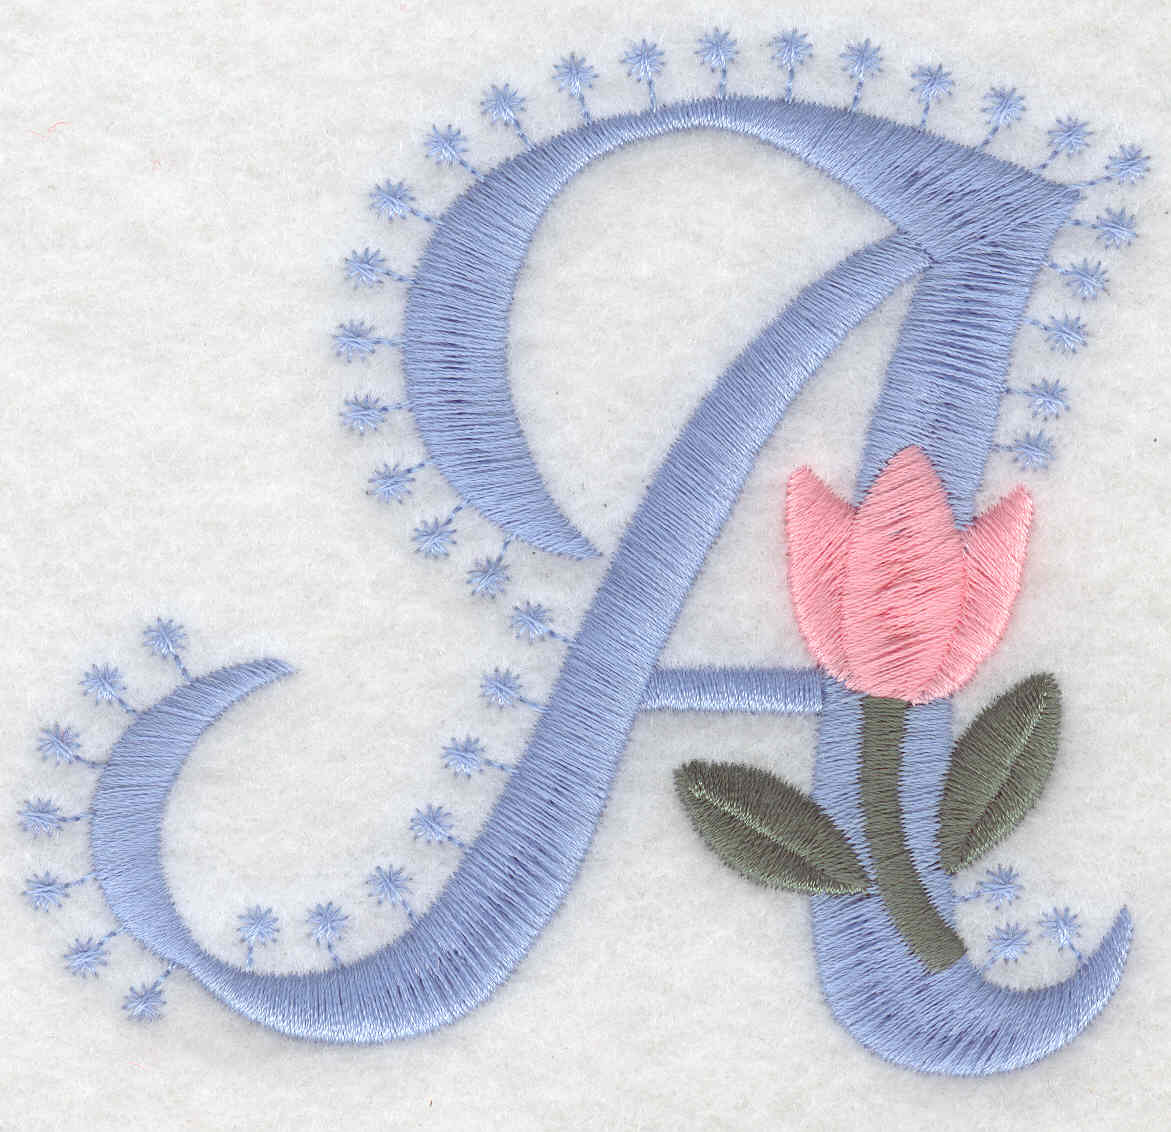 Embroidery Design: A Large3.53inH x 3.83inW